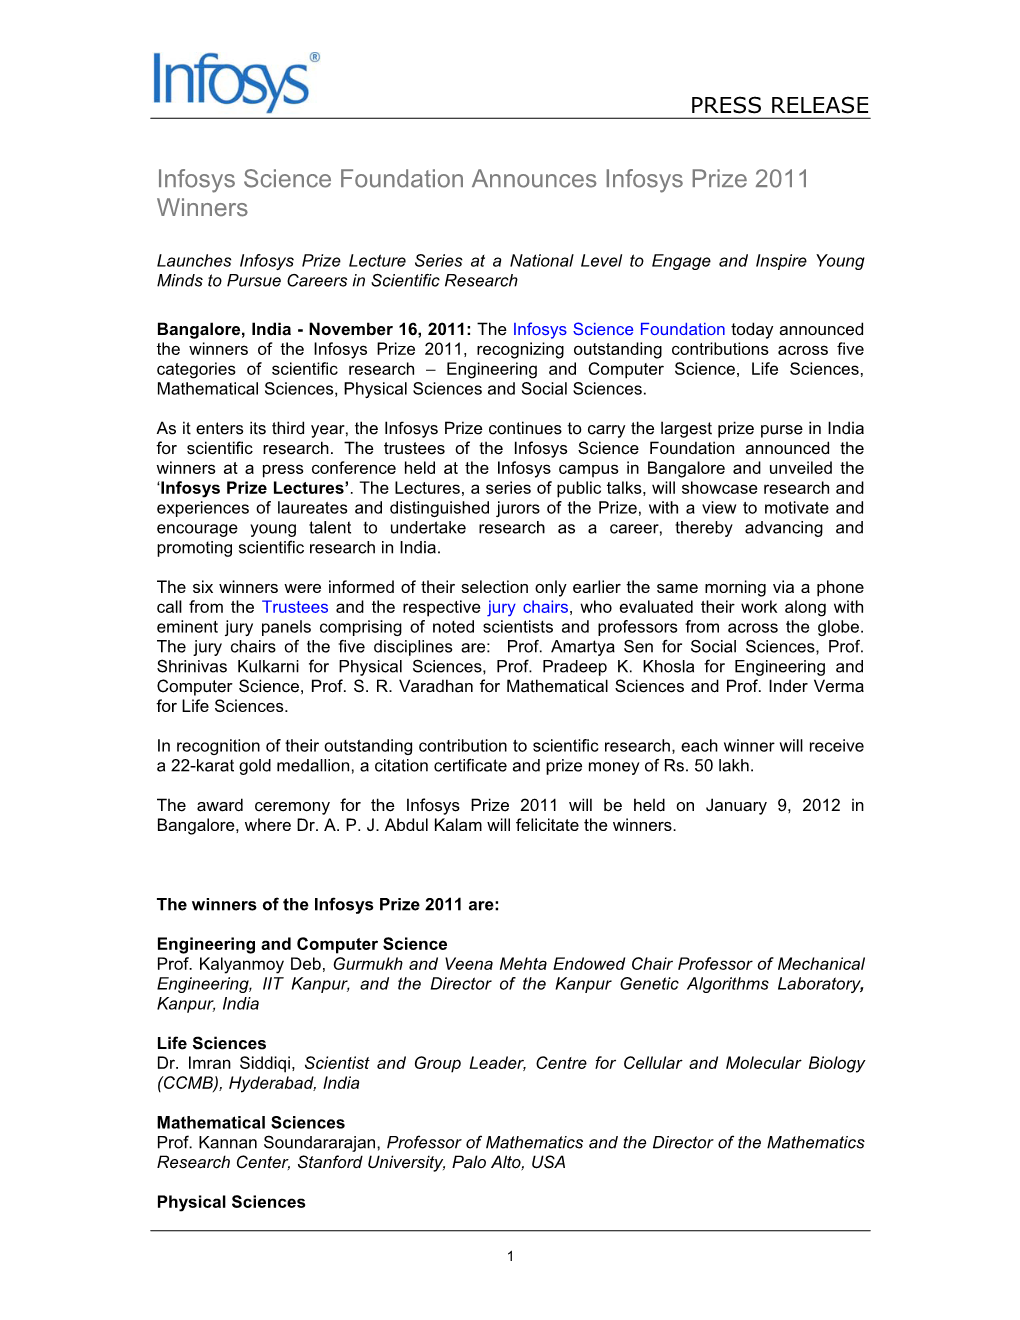 Infosys Science Foundation Announces Infosys Prize 2011 Winners